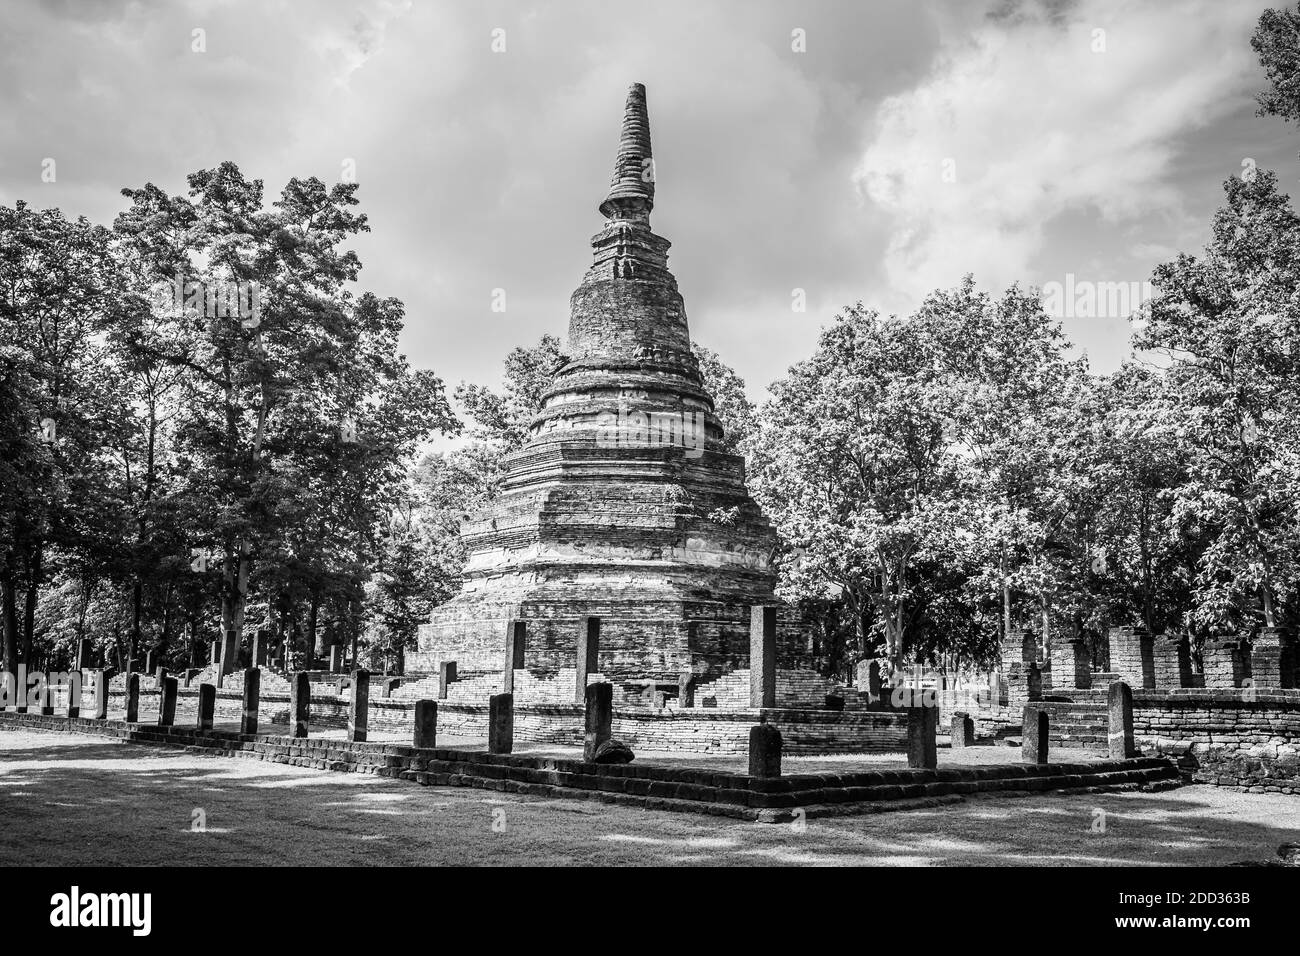 Landmark of old chedi made of ancient bricks in the Kamphaeng Phet Historical Park, Thailand. Black and white Stock Photo